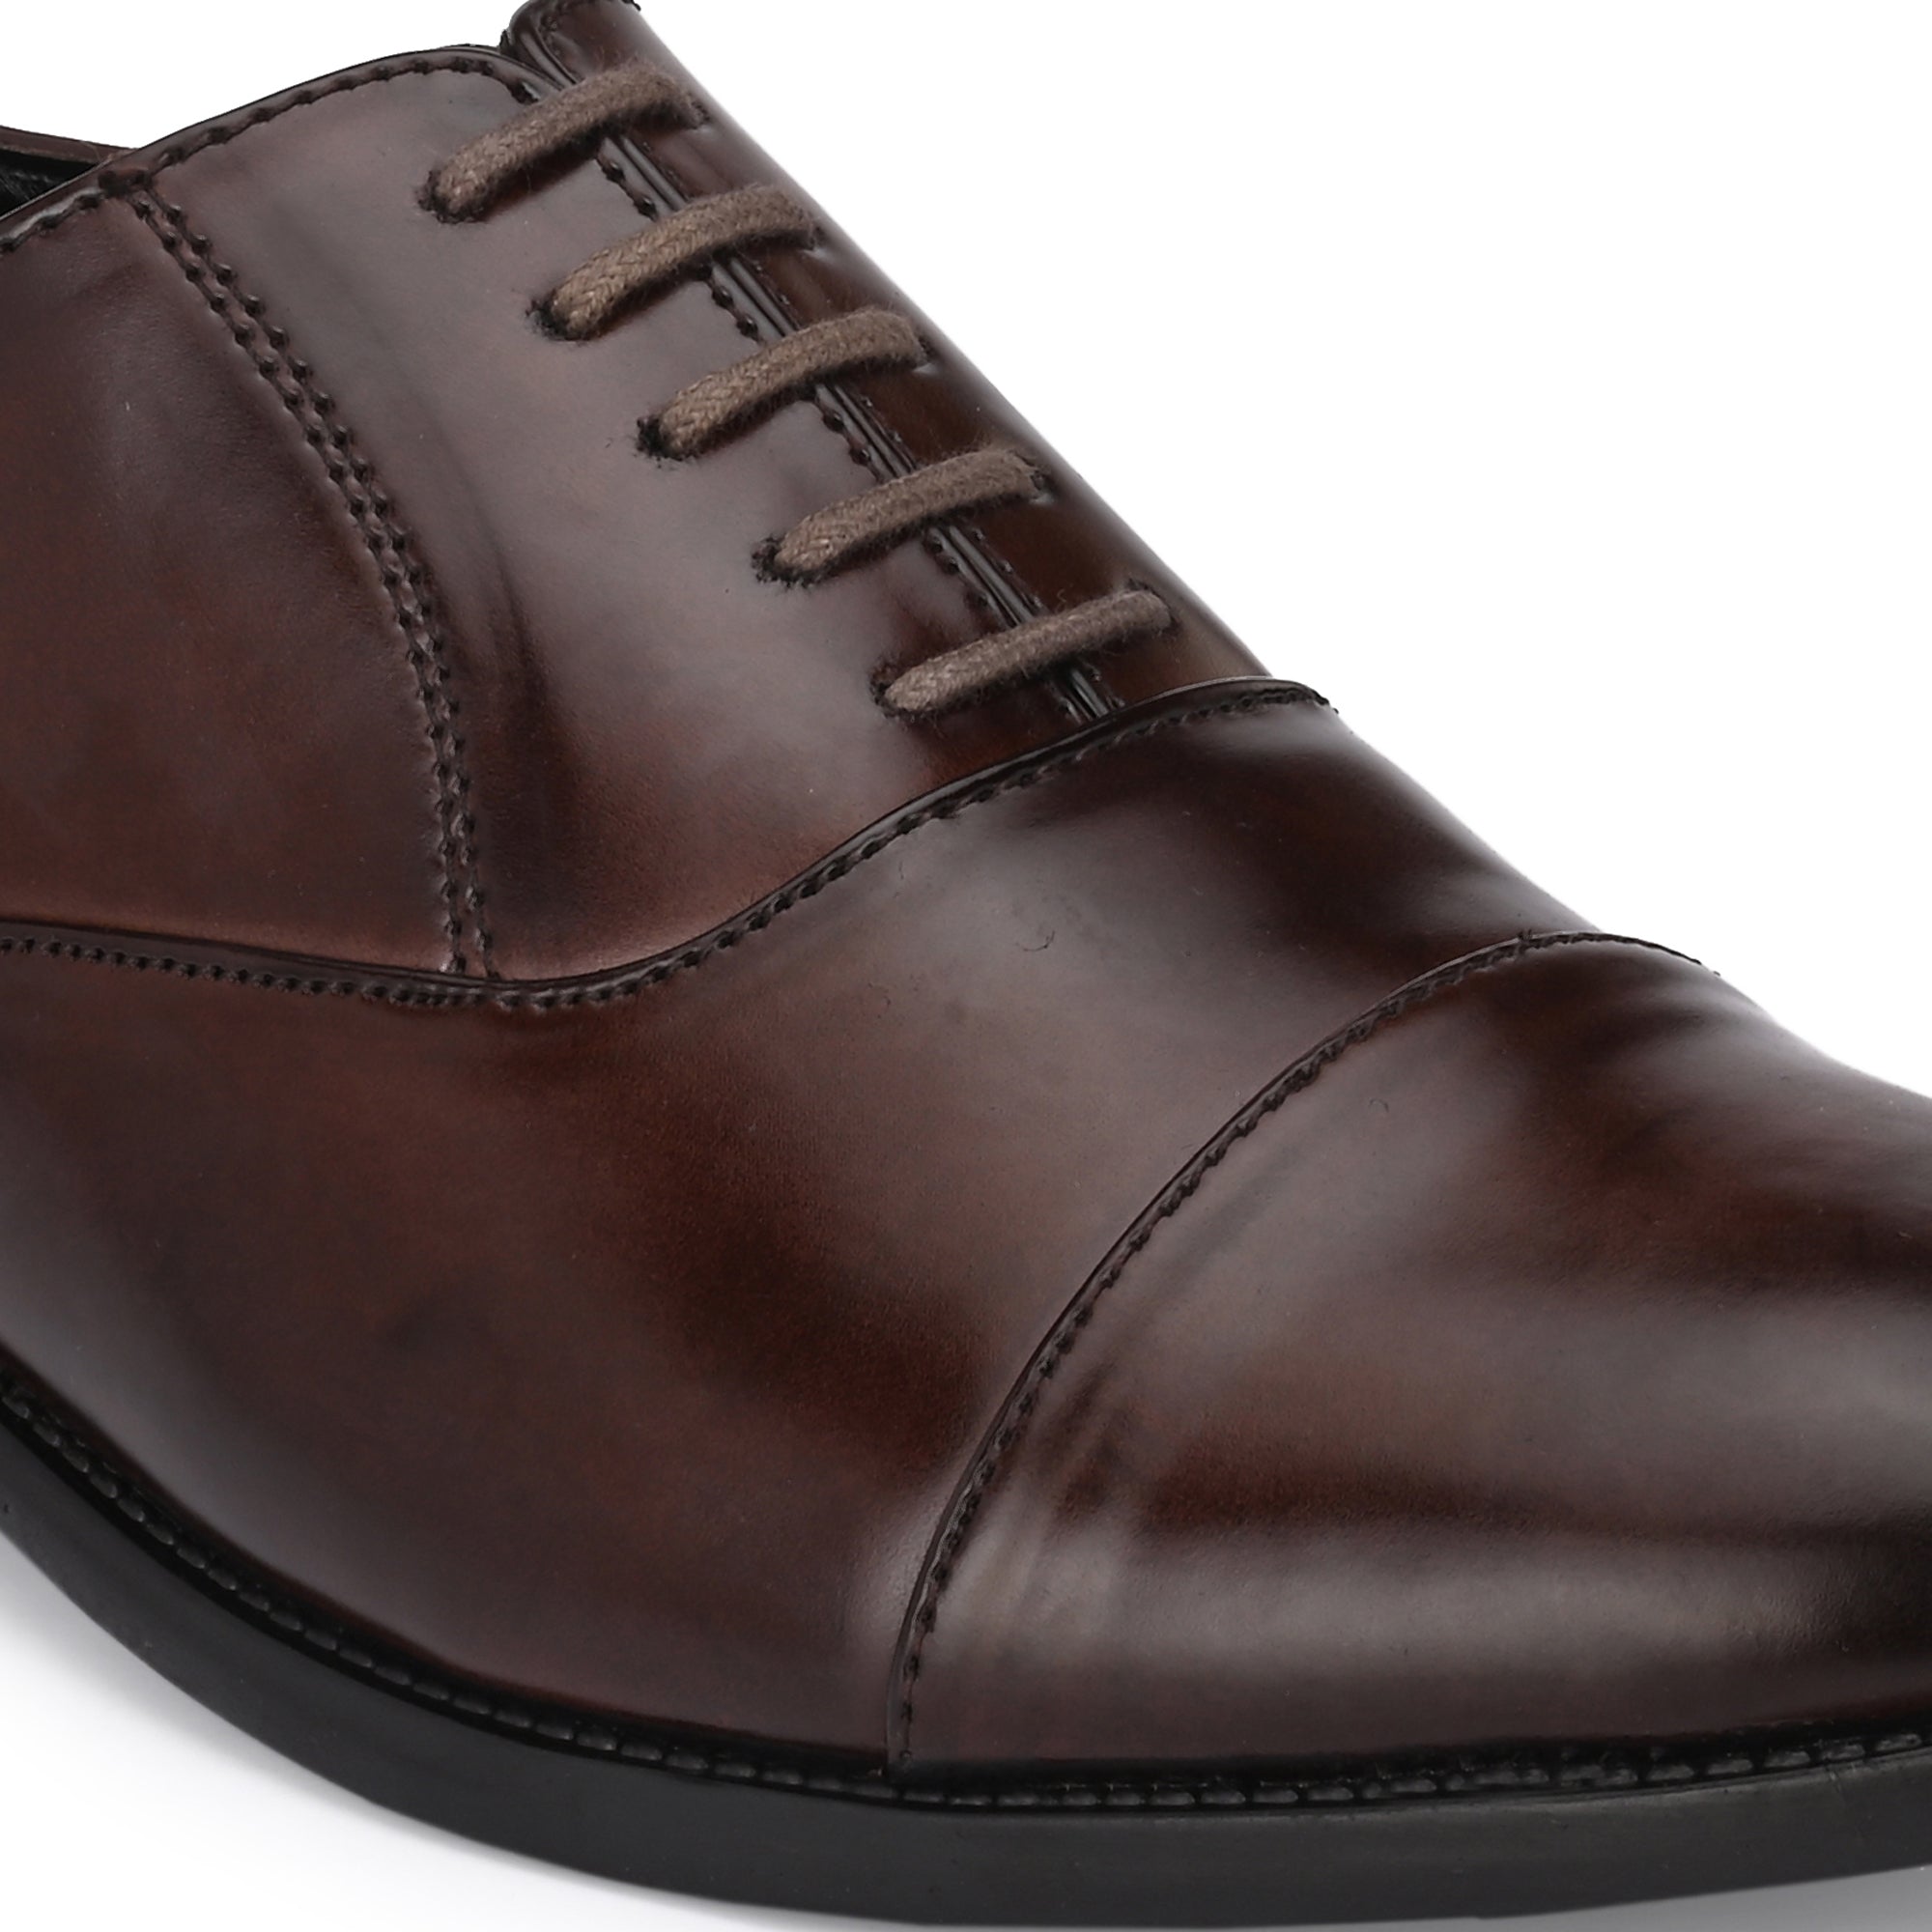 Attitudist Handcrafted Oxford Brown Plain Formal Laceup Derby Shoes With Cap Toe For Men MTOBSF